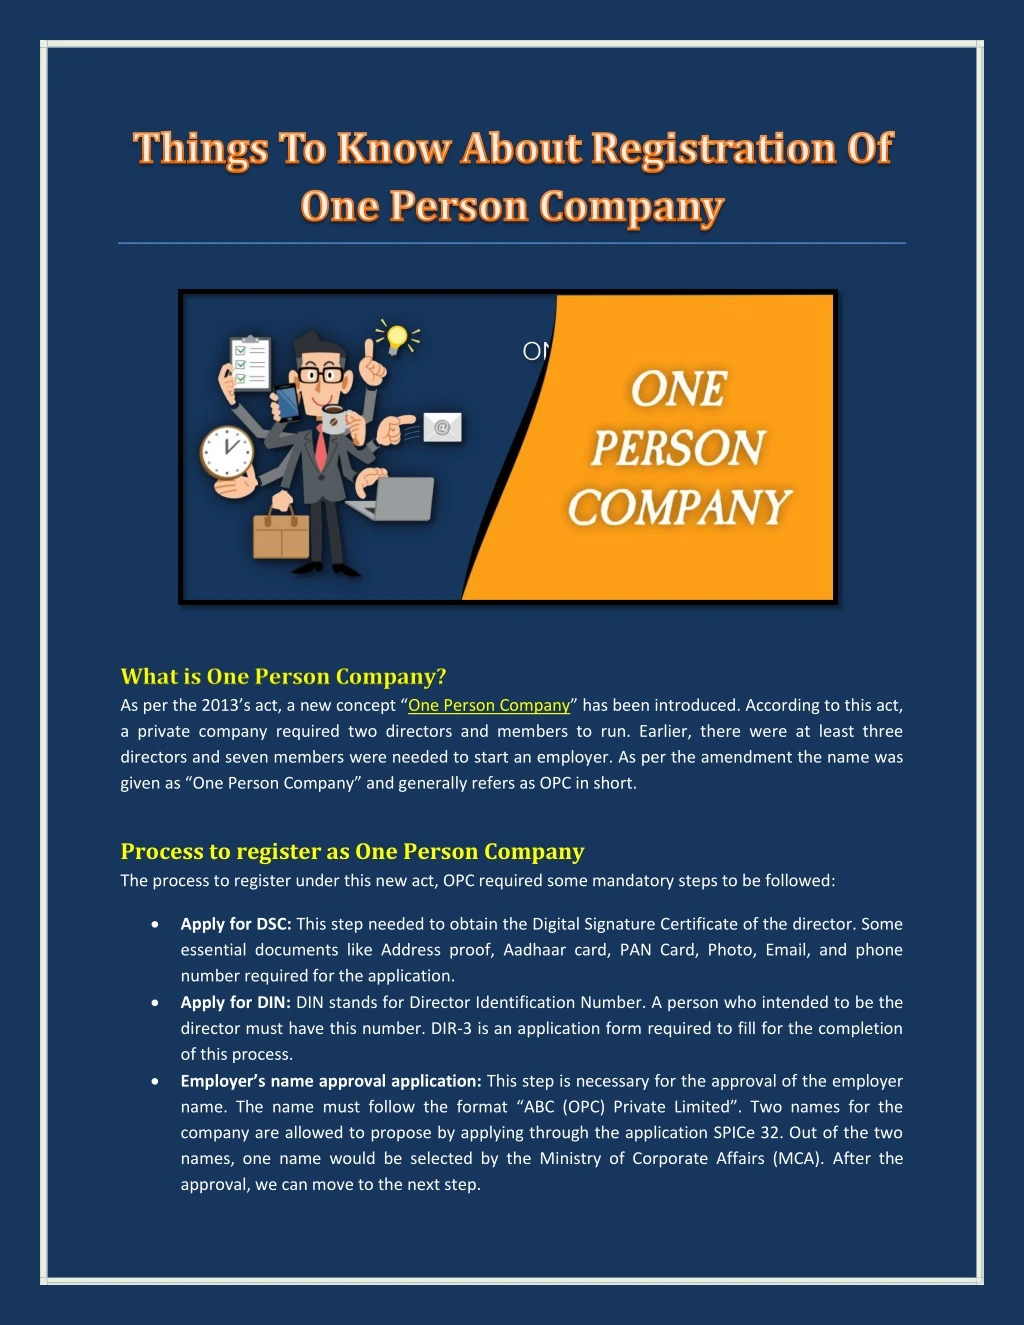 what is one person company as per the 2013